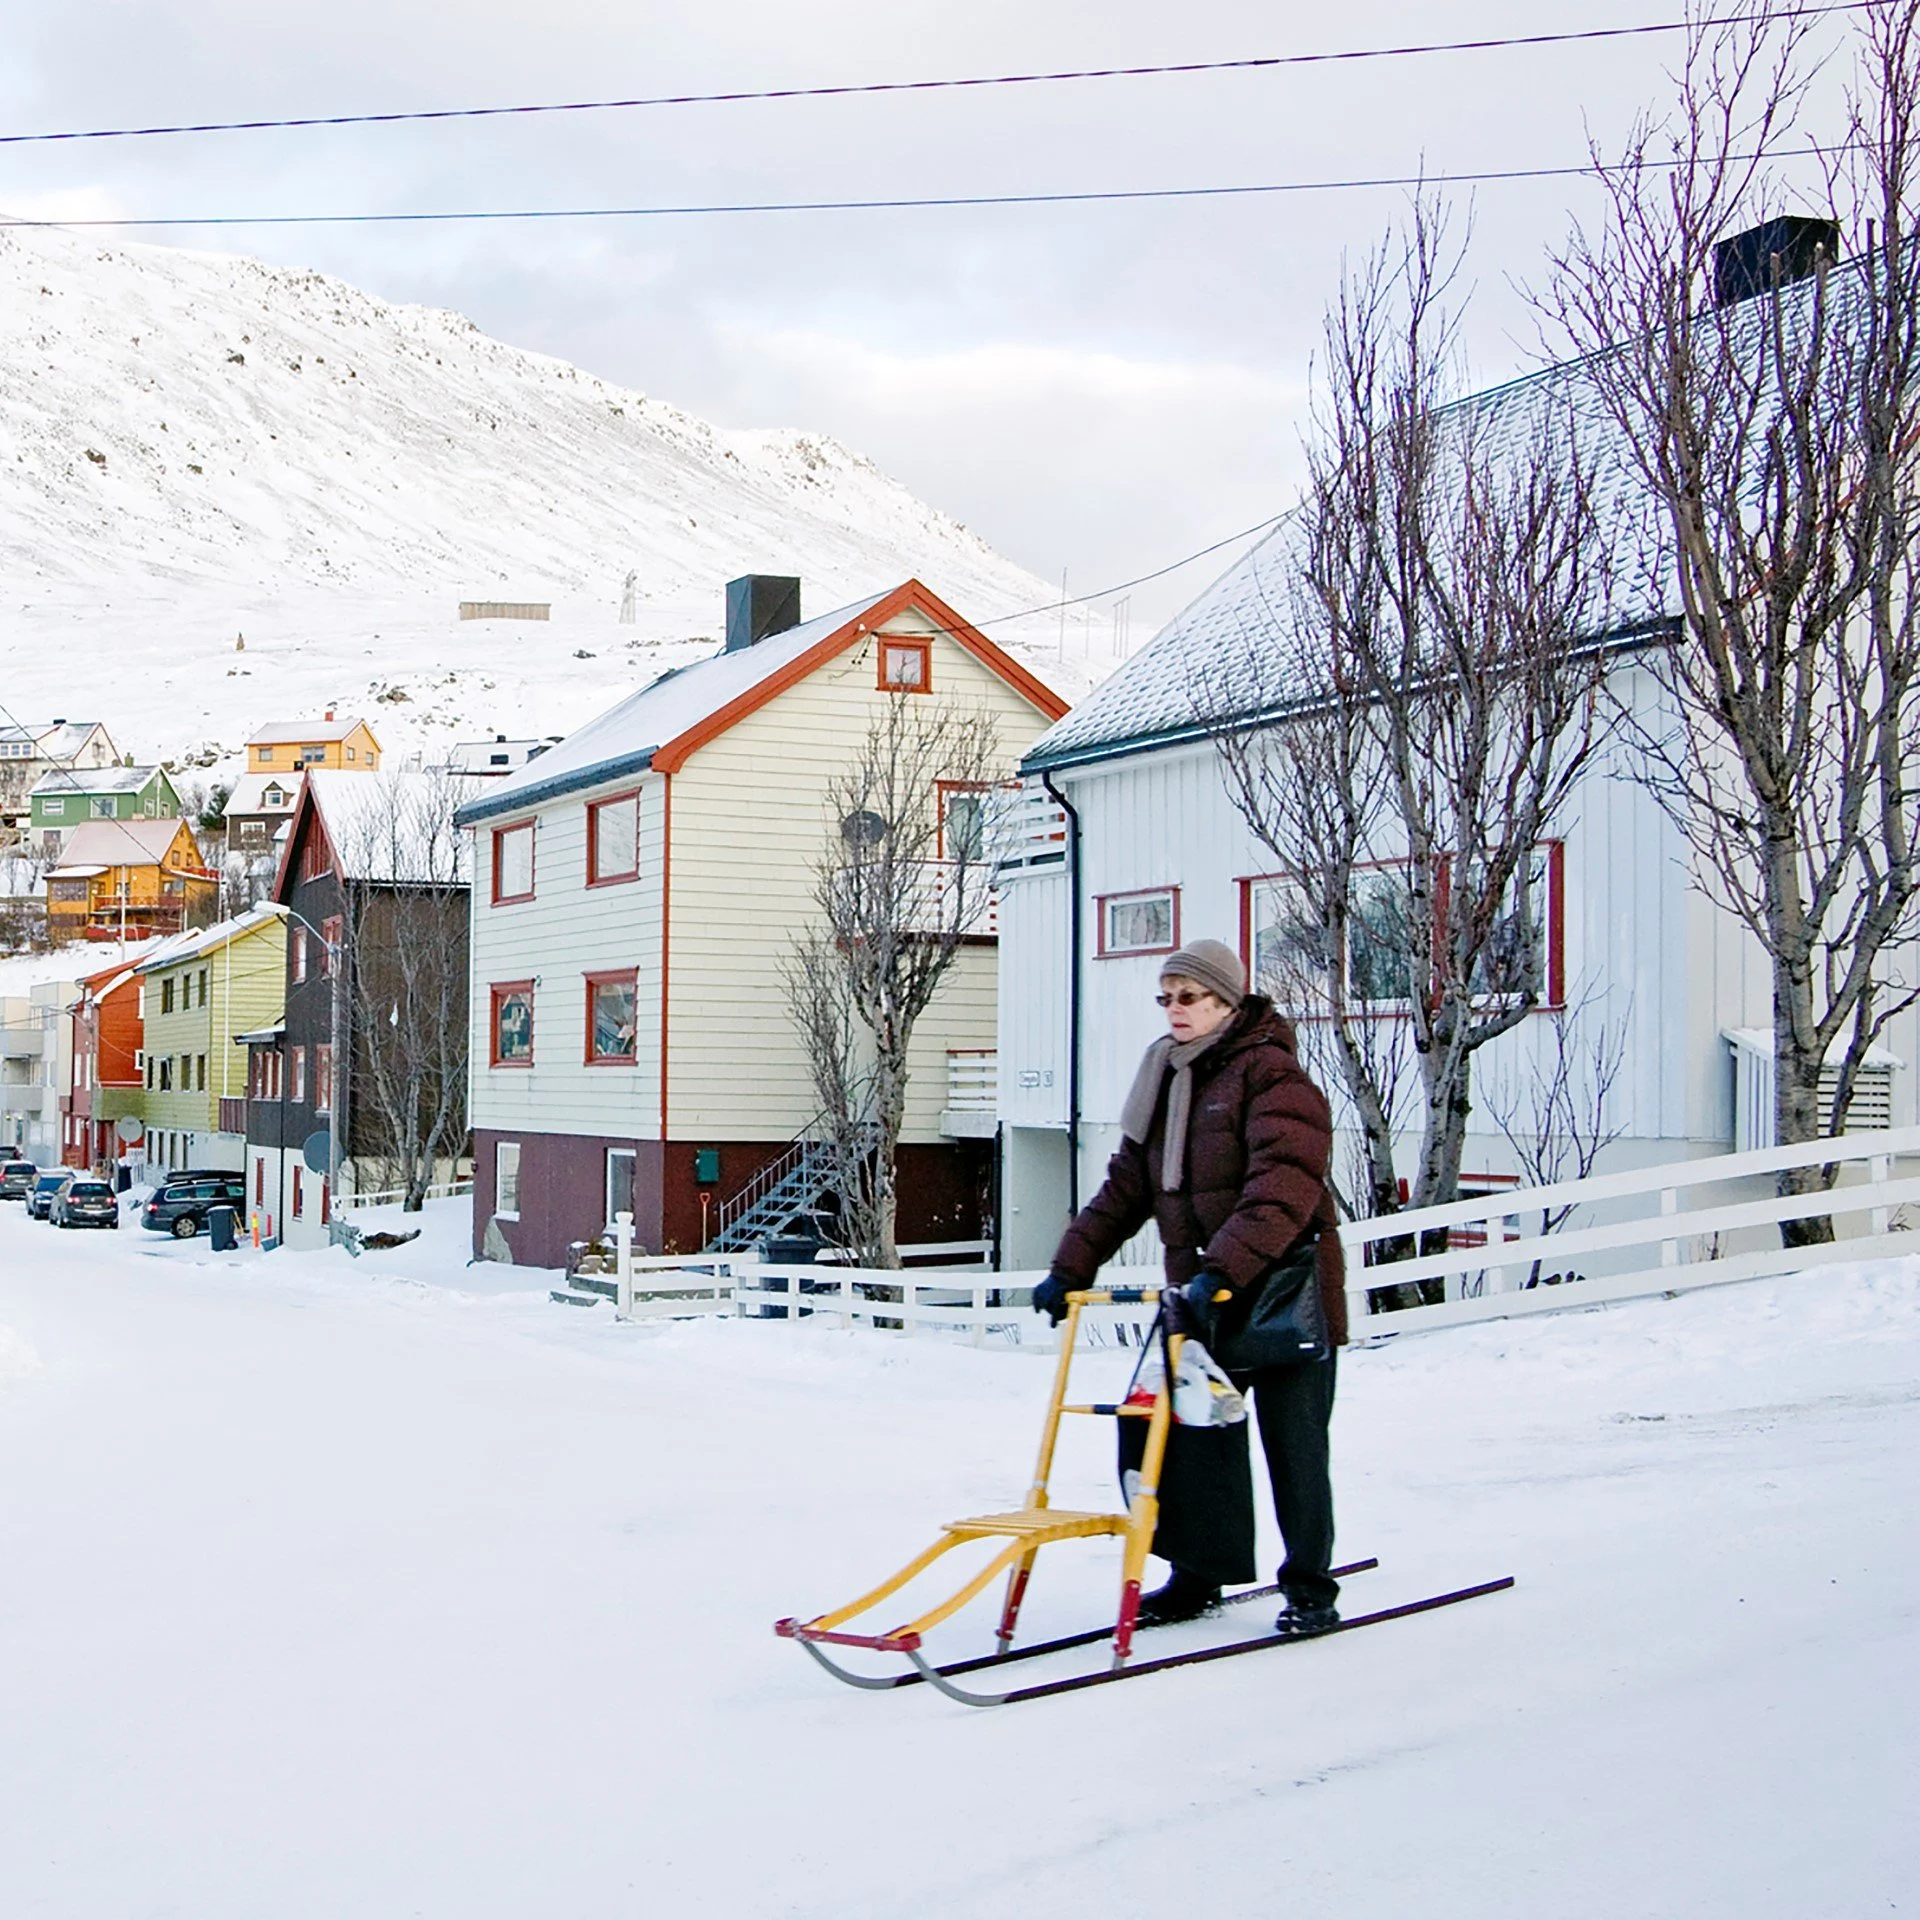 Photo showing an elderly woman in the snow, behind her a street with beautiful and colorful, small wooden houses